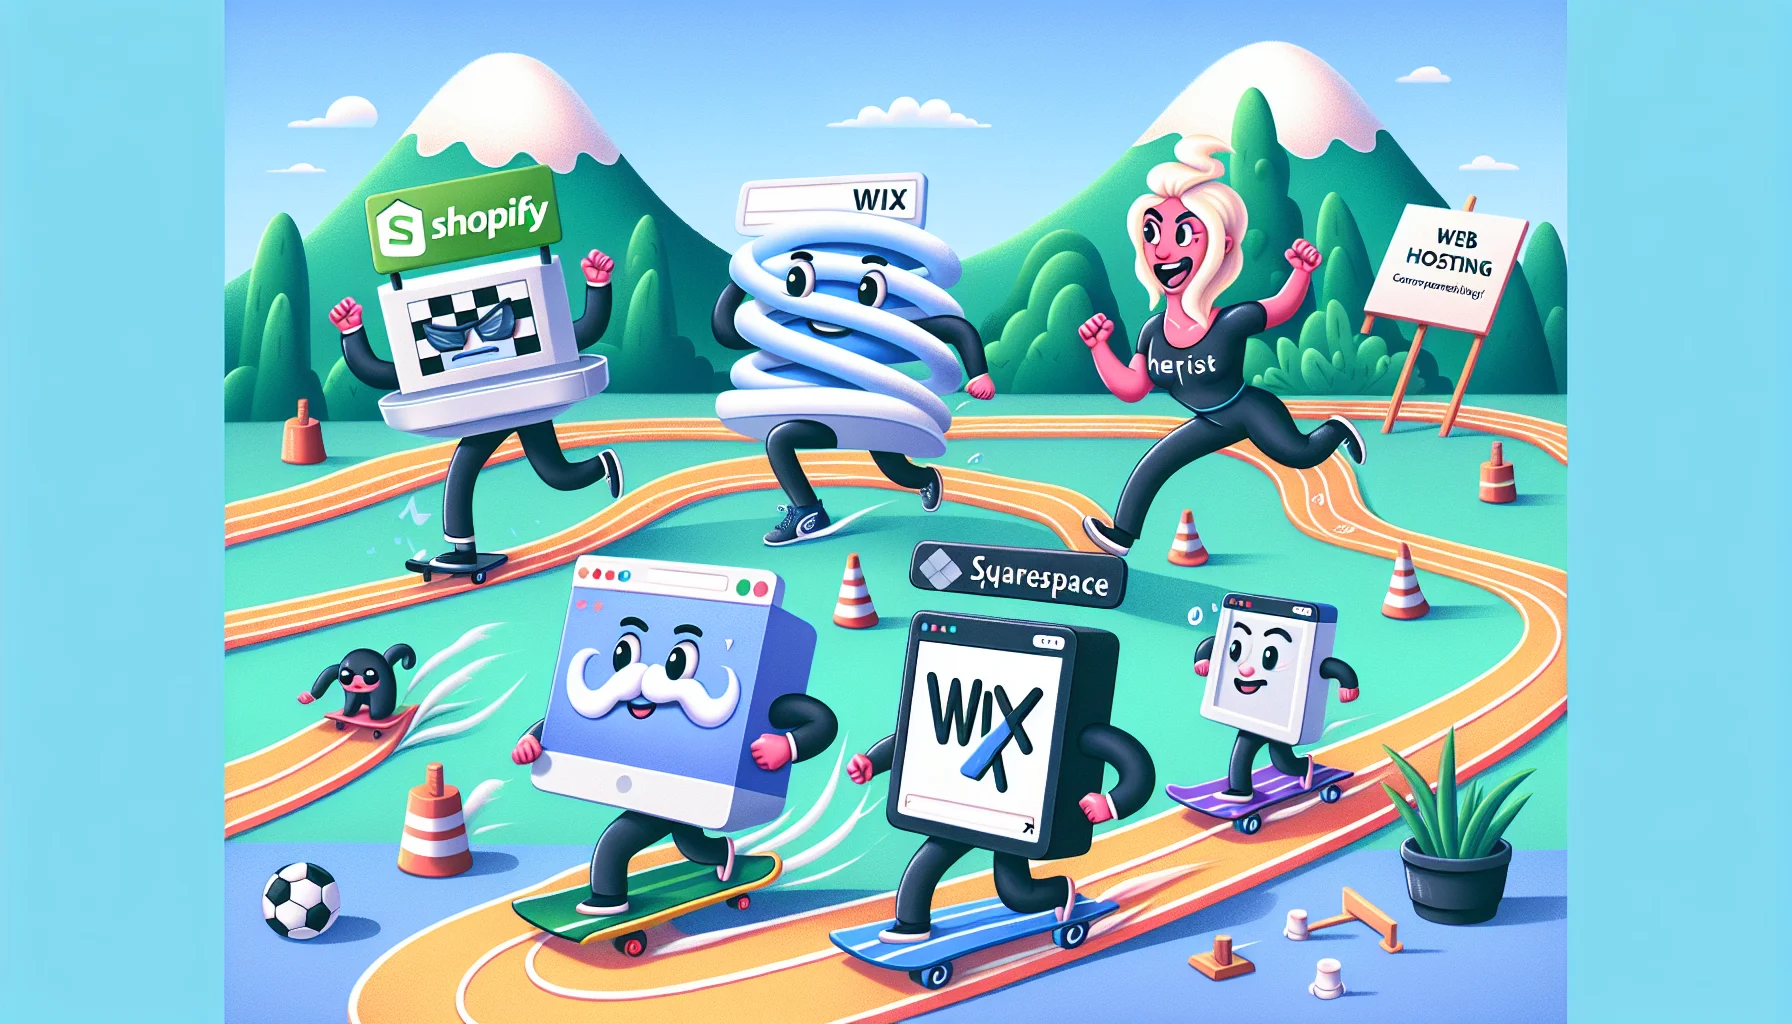 Create a humorous and charming scene depicting the personified websites of Shopify, Wix, and Squarespace in a competition scenario, related to web hosting. Show Shopify as a dynamic, pragmatic person, Wix as an intuitive, creative character, and Squarespace as an elegant, sophisticated individual. They are all participating in a whimsical, engaging race where the track represents the path to successful web hosting. They should be energetically manoeuvring obstacles that represent common challenges in web hosting like 'Website speed', 'uptime', and 'security'. This playful metaphor should help to capture the essence of these platforms' rivalry in the web hosting arena.